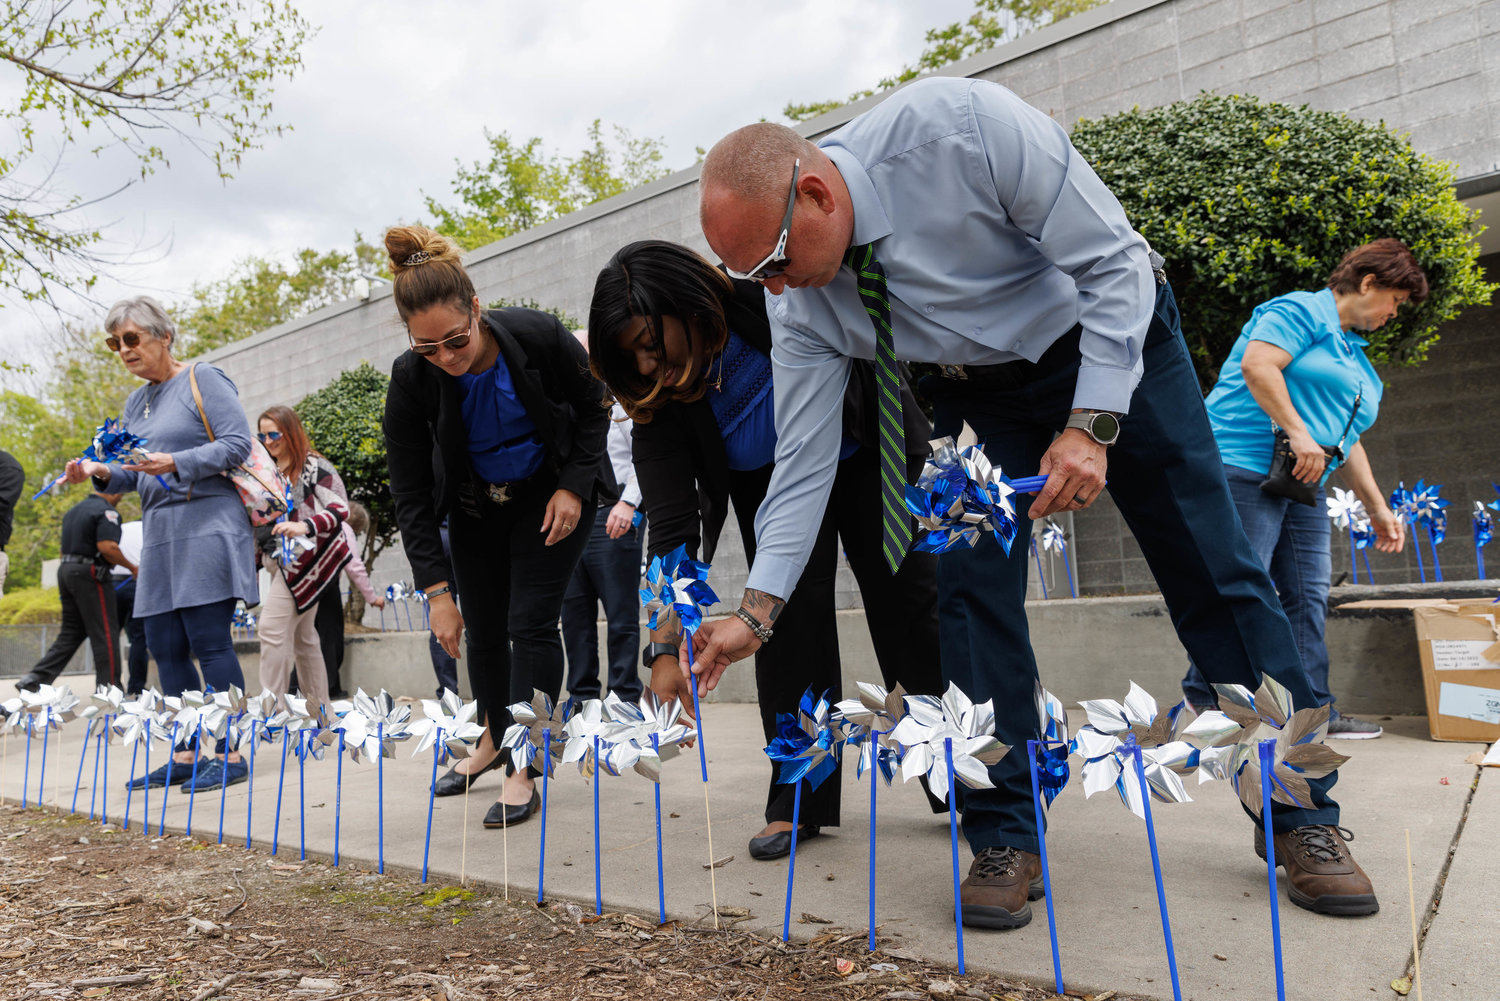 Members of law enforcement agencies plant pinwheels at Festival Park in recognition of April as Child Abuse Prevention Month.